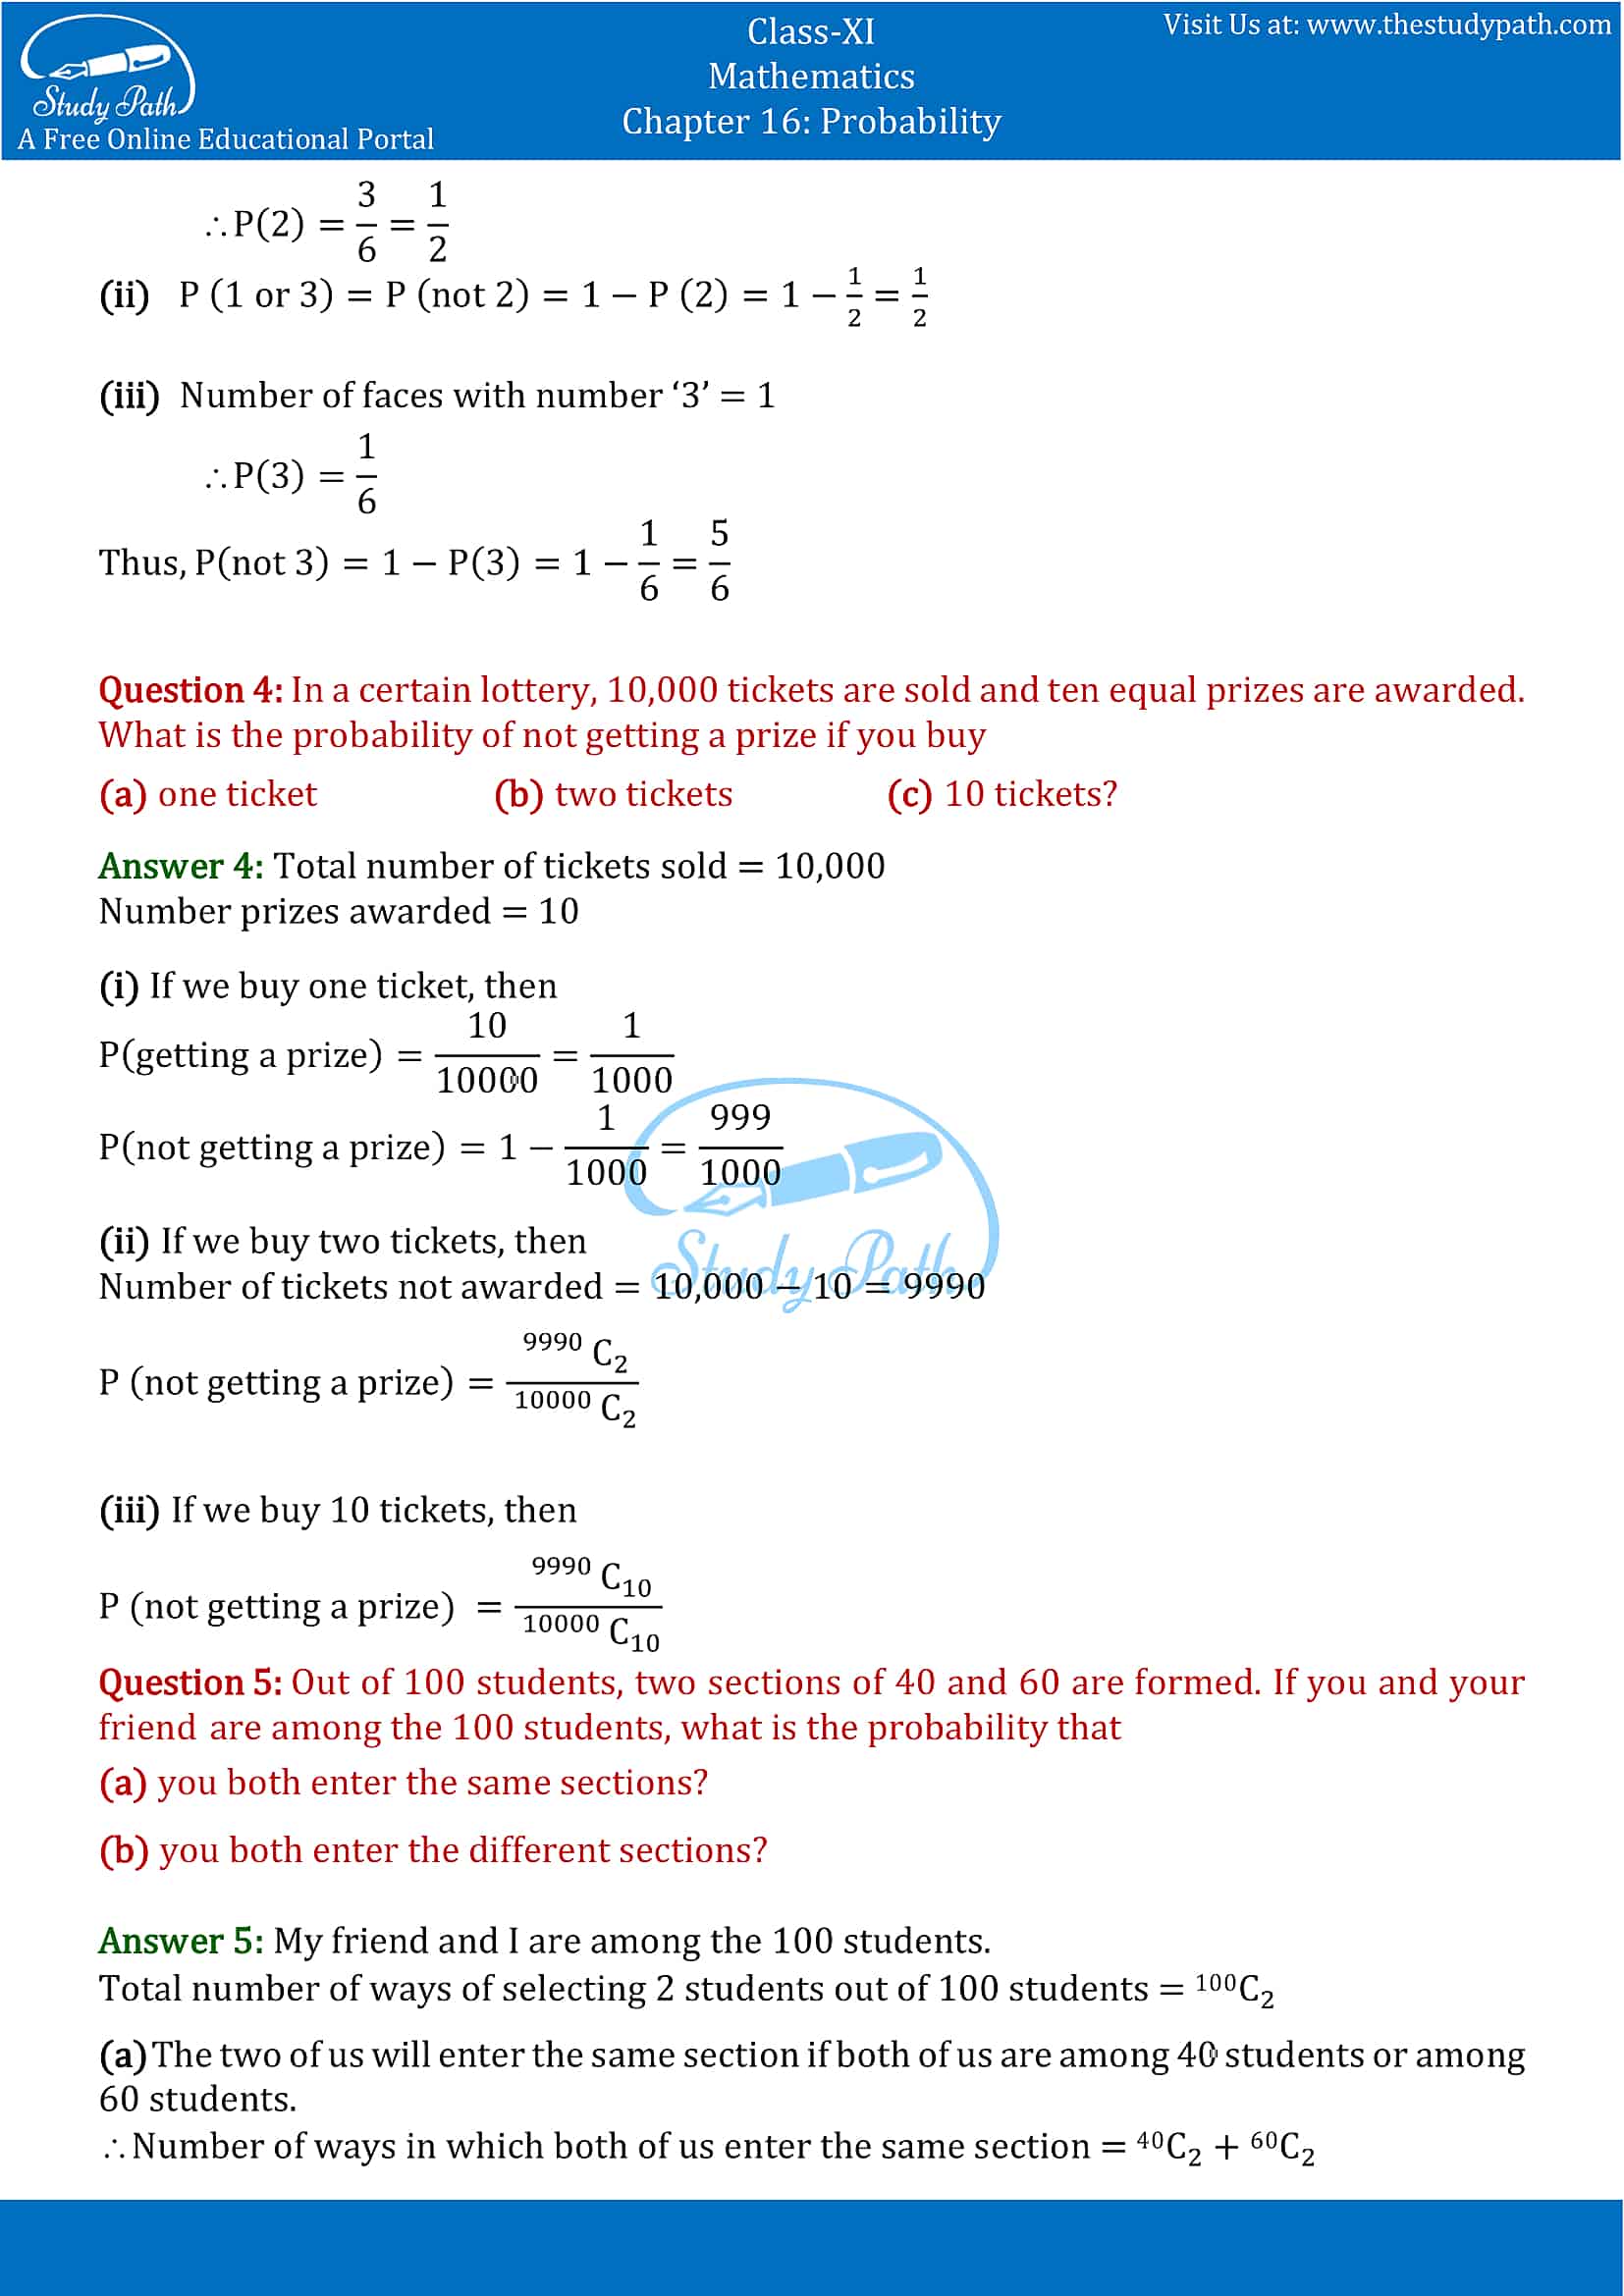 NCERT Solutions for Class 11 Maths chapter 16 Probability Miscellaneous Exercise part-2